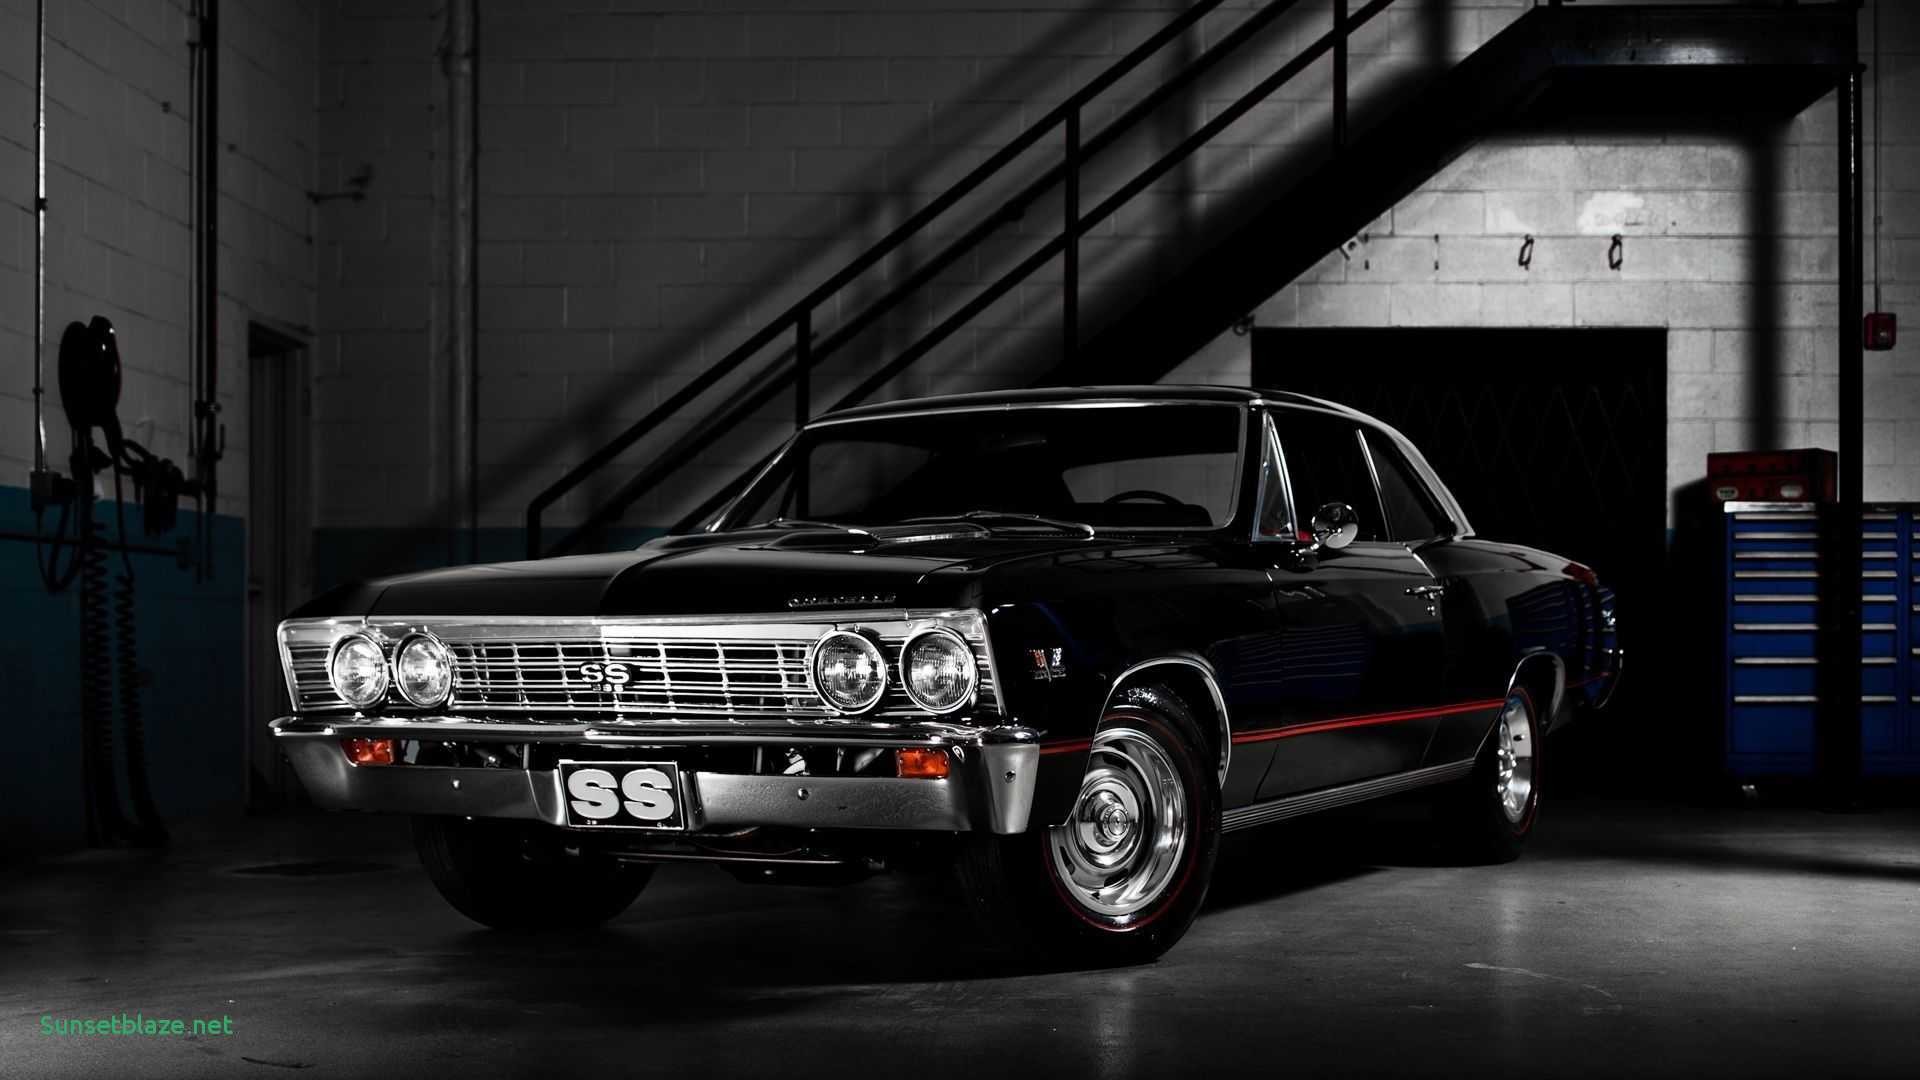 1920x1080 Old Muscle Cars Wallpaper Hd 3 Hd Wallpapers Unique Of Hd Flat Black Muscle  Car Wallpapers